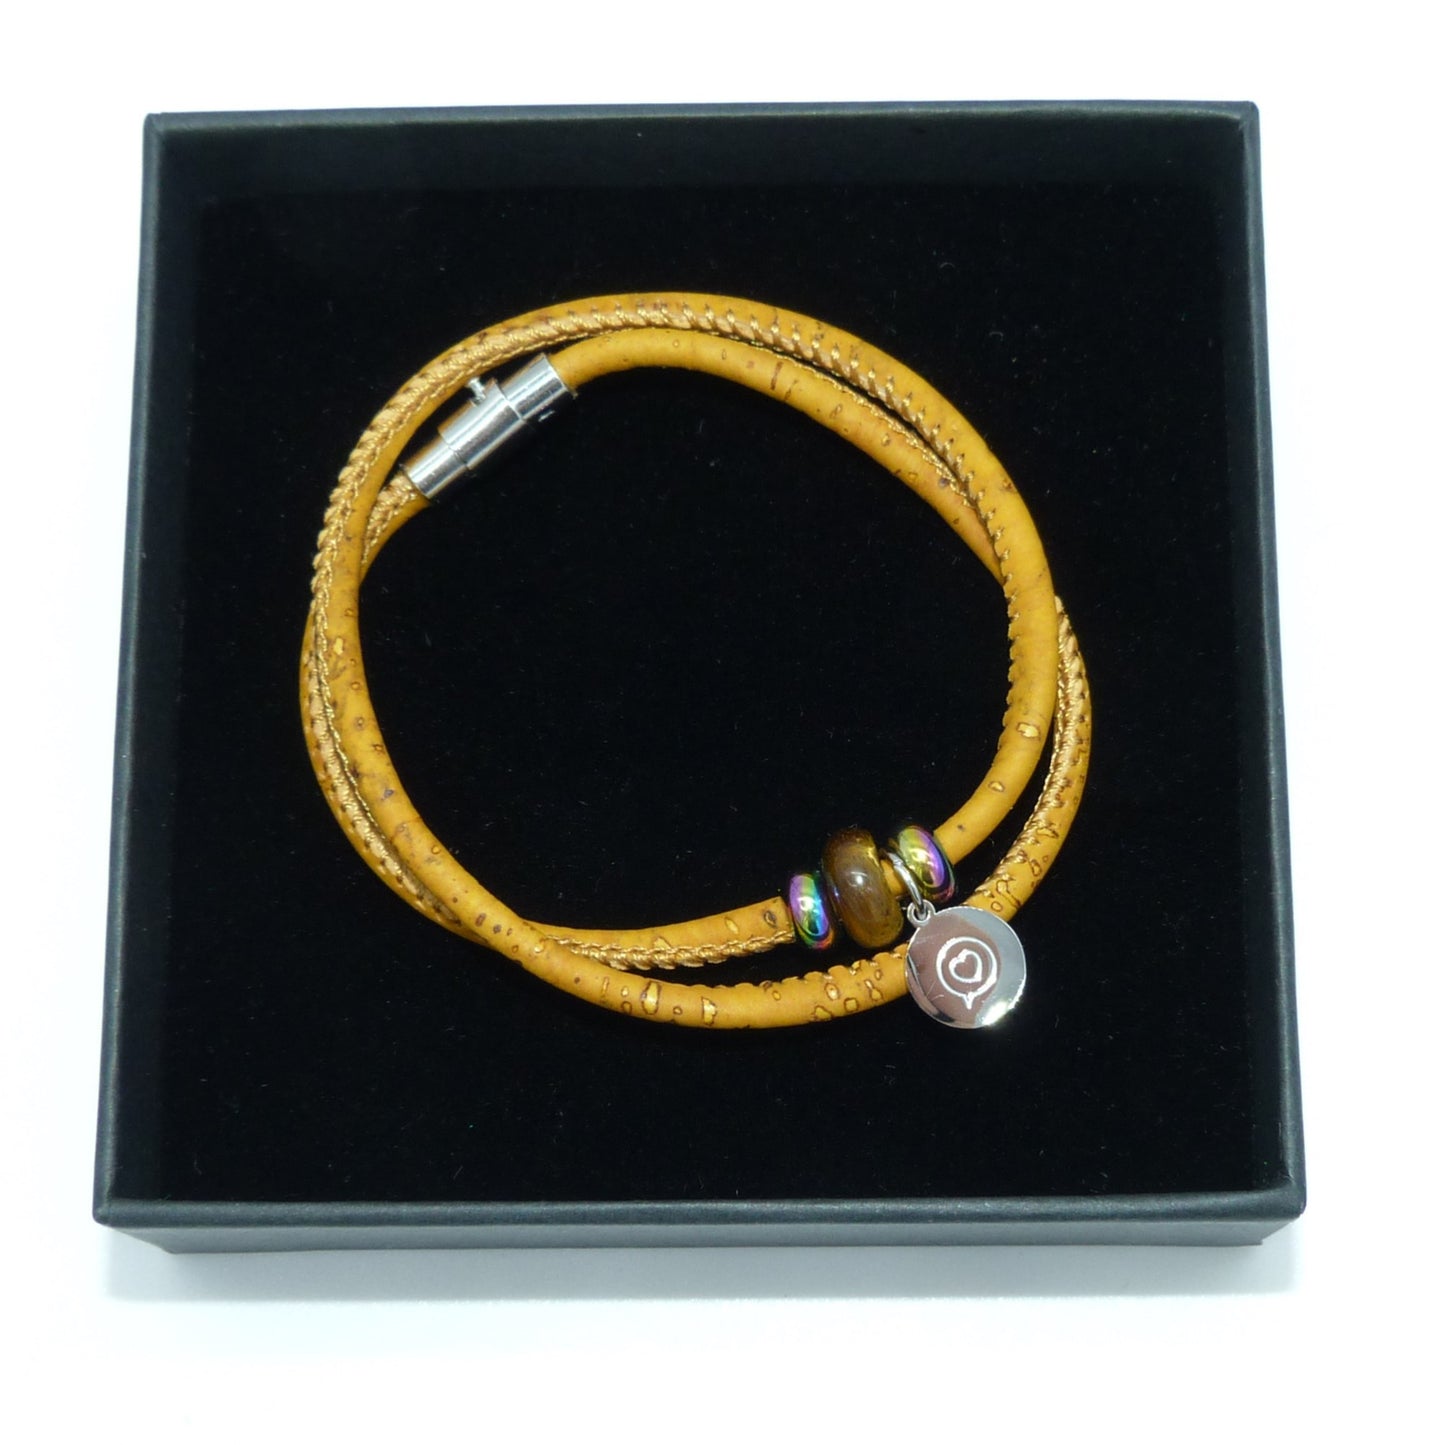 Yellow cork bracelet with stainless steel magnetic clasp . Gemstone Tiger’s eye  bead with stainless steel tag with the logo of Roo Betty of  a heart in a speech bubble .  Presented in a black gift box